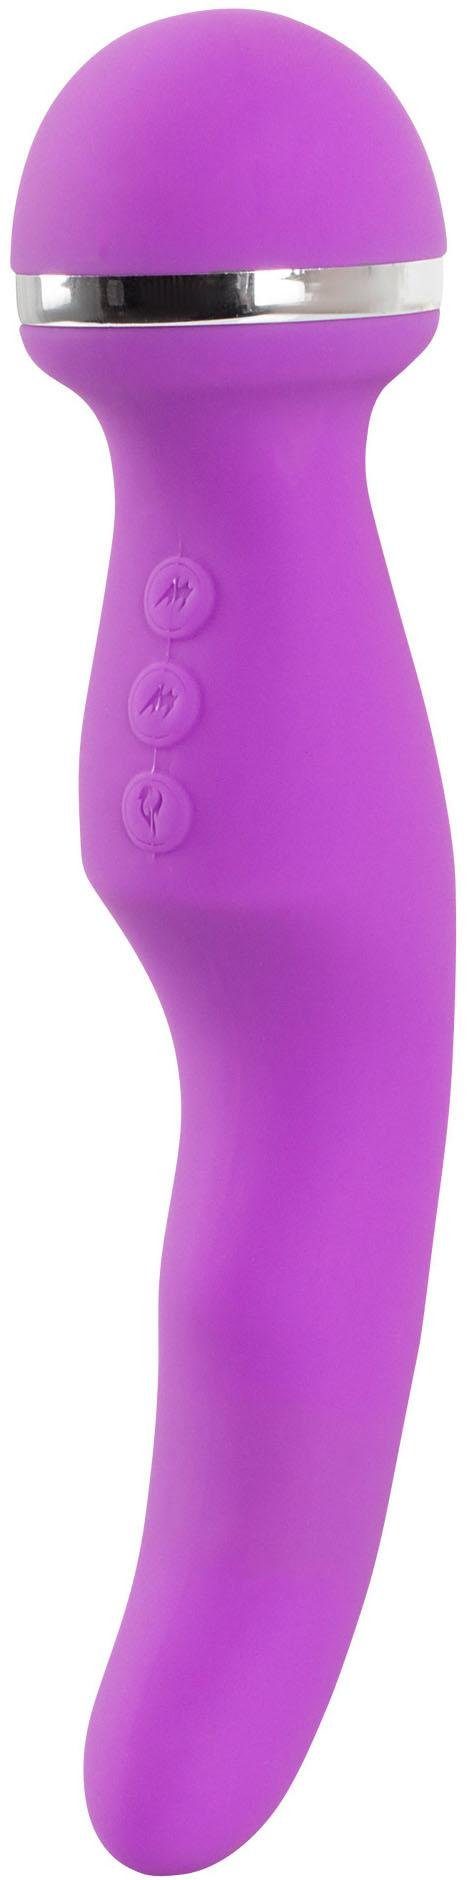 You2Toys Wand Massager Rechargeable Warming Vibe, 2-in-1